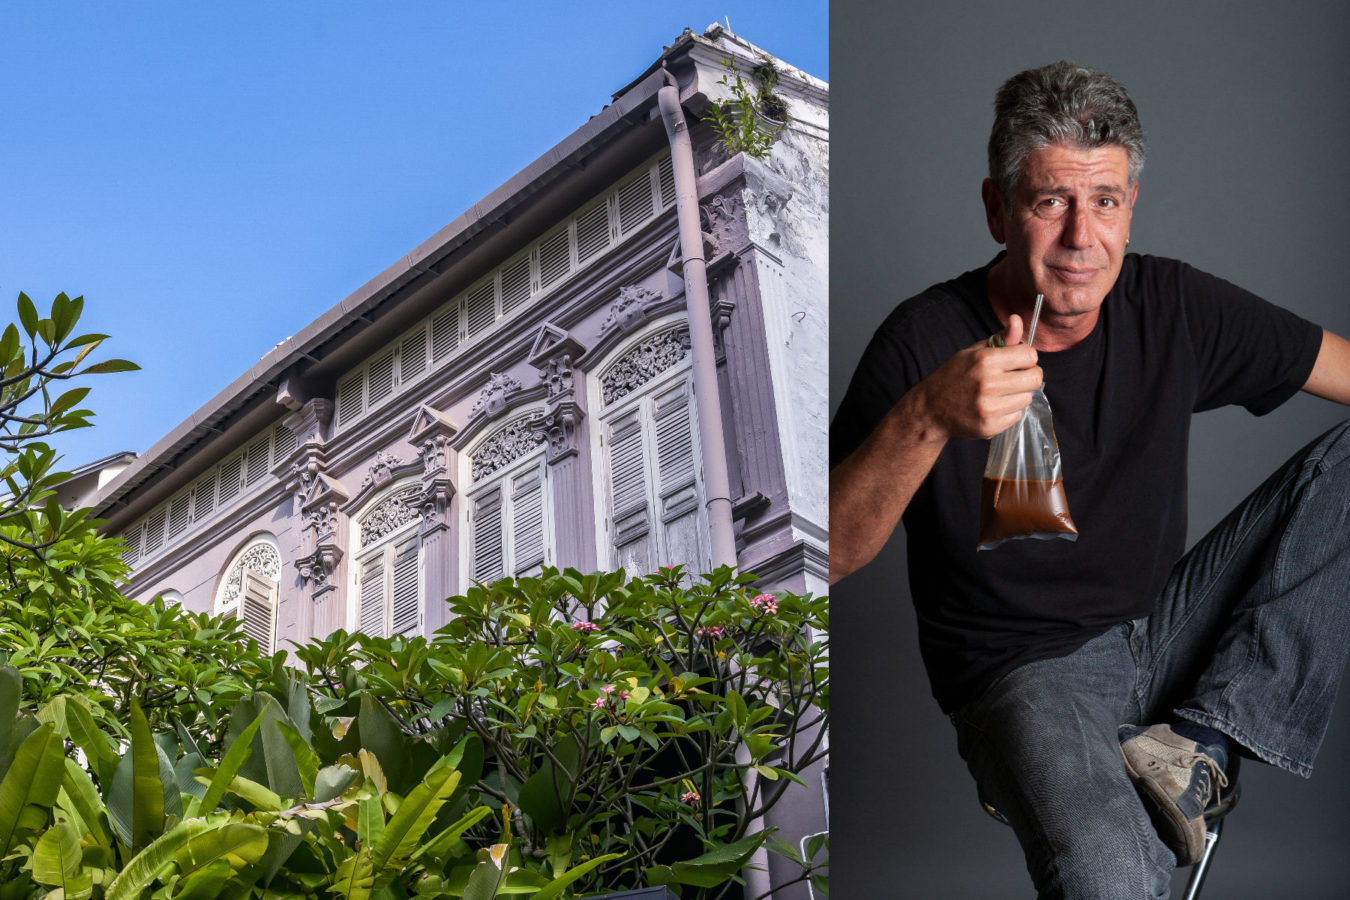 The spirit of Anthony Bourdain lives on at The English House exhibit in Singapore